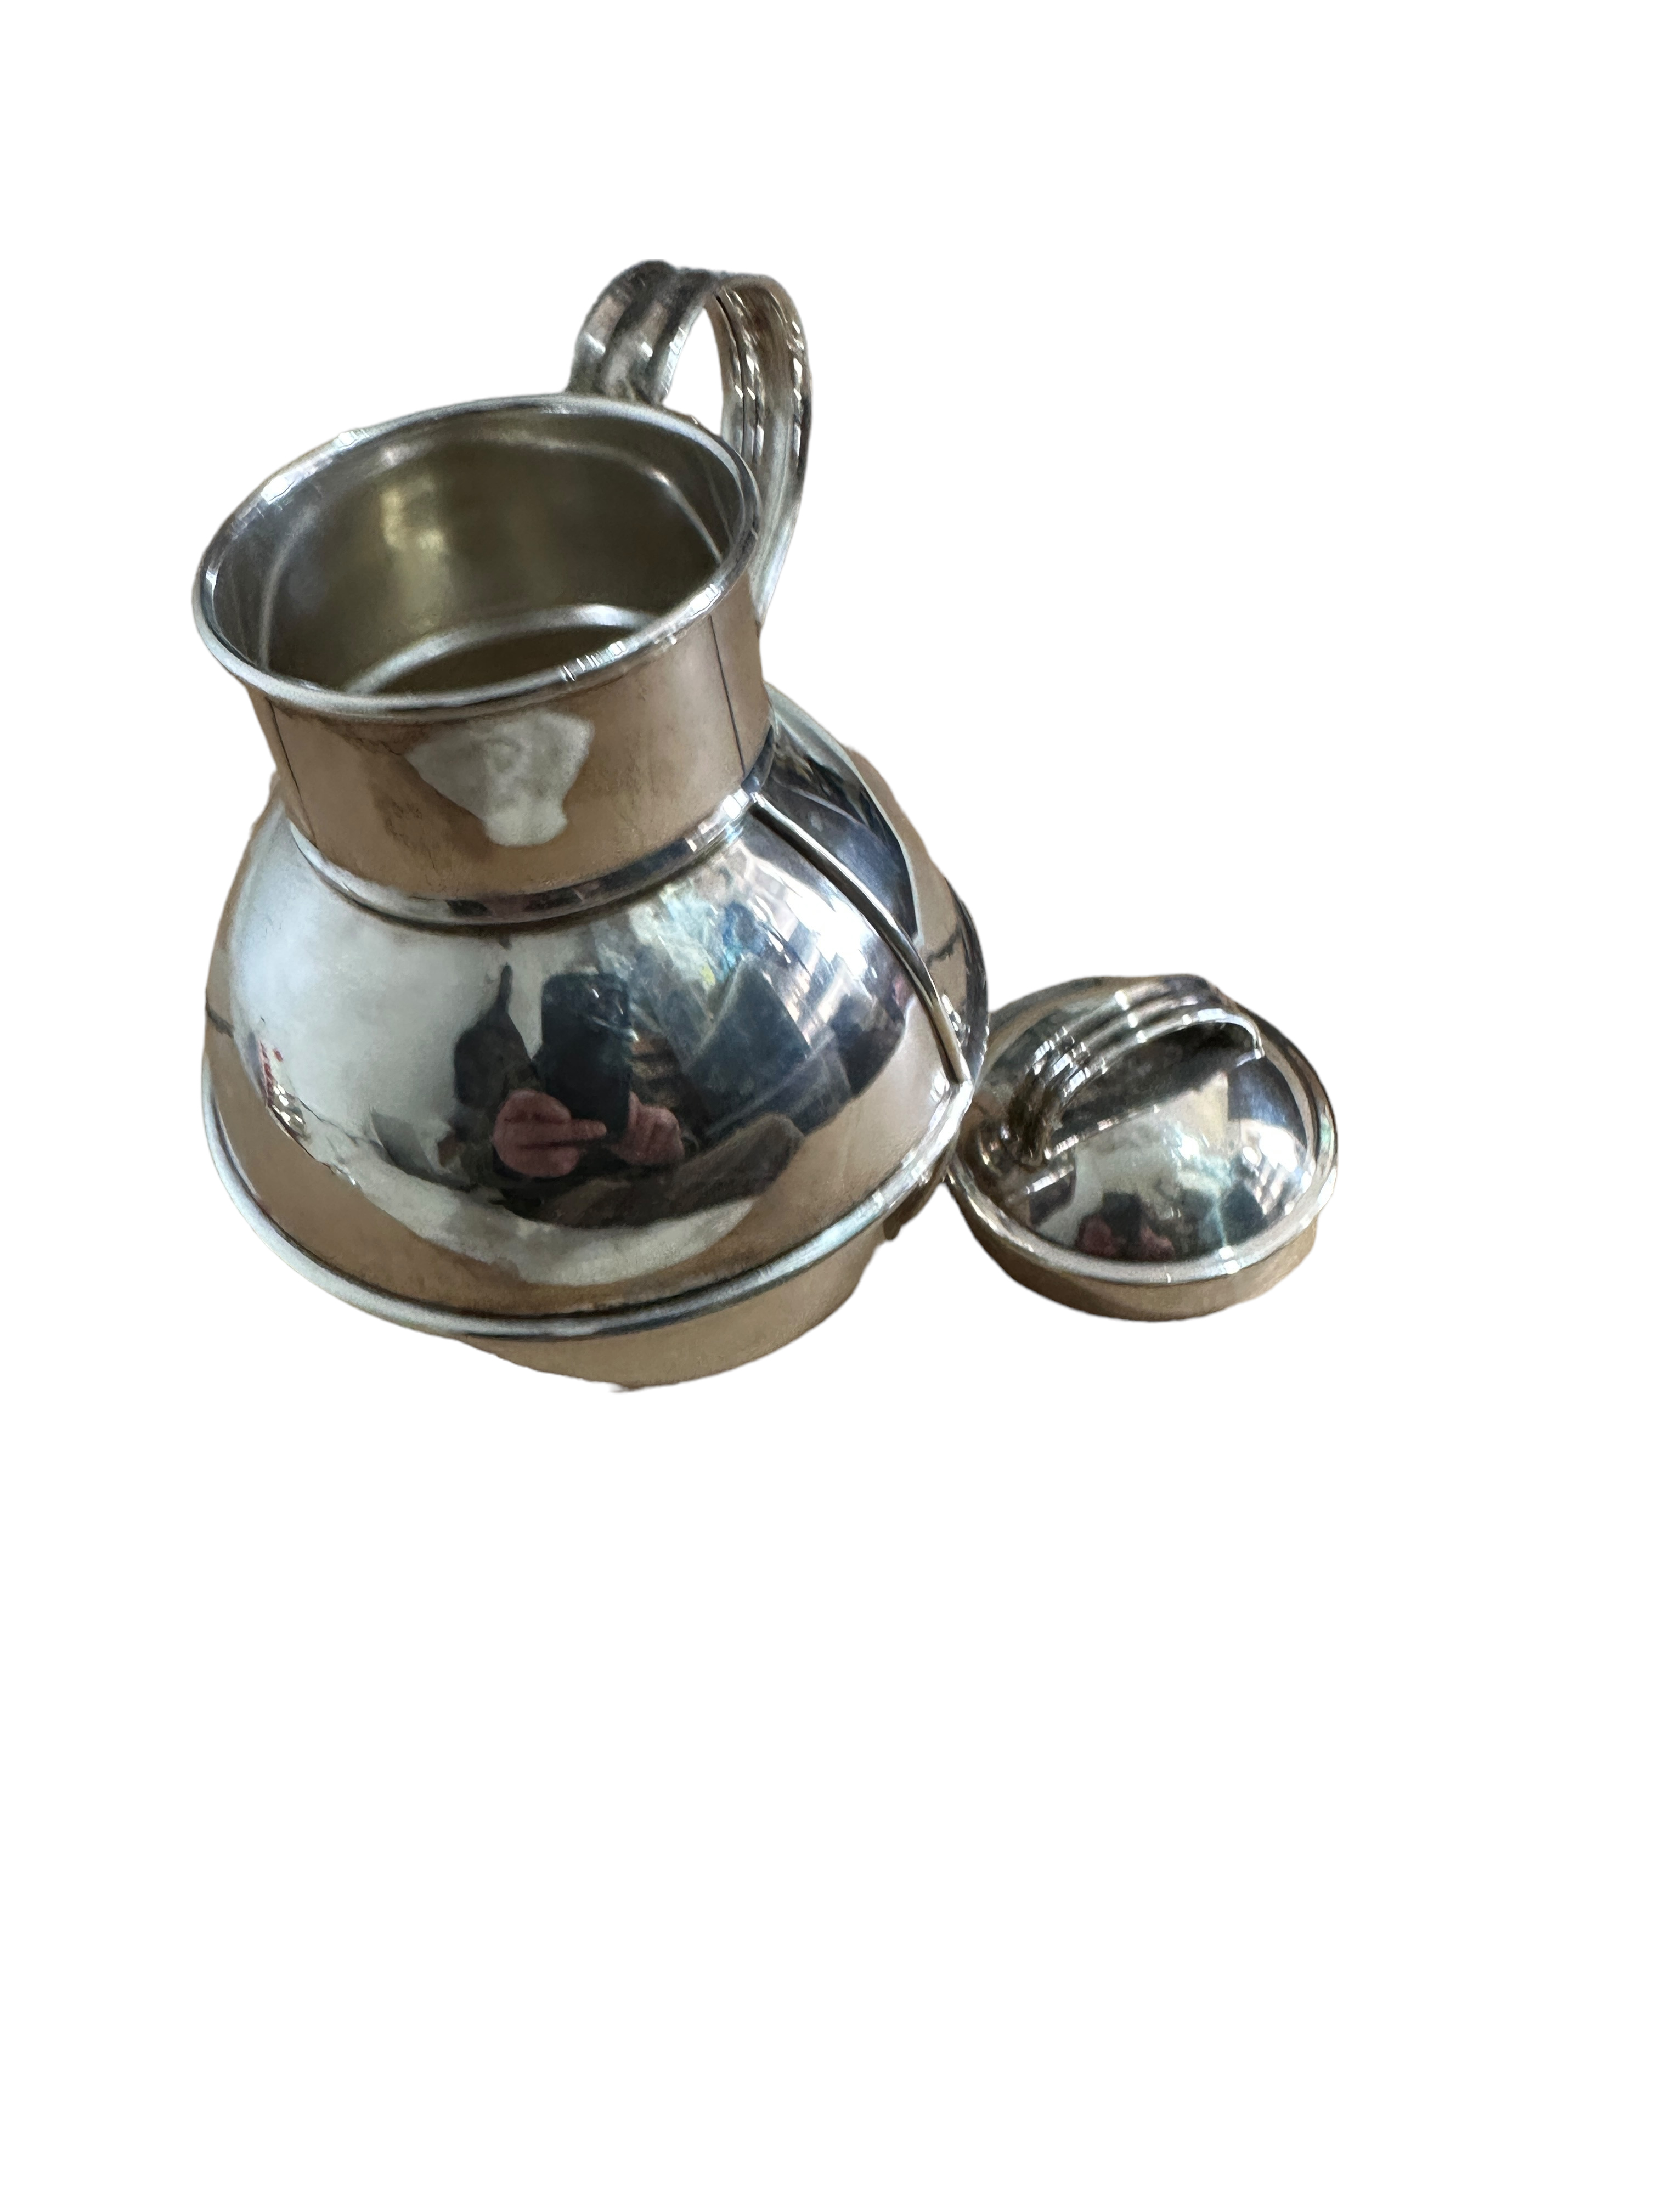 Vintage Silver Lidded Milk Jug - 15cm tall and 14cm at the widest. - Image 3 of 5